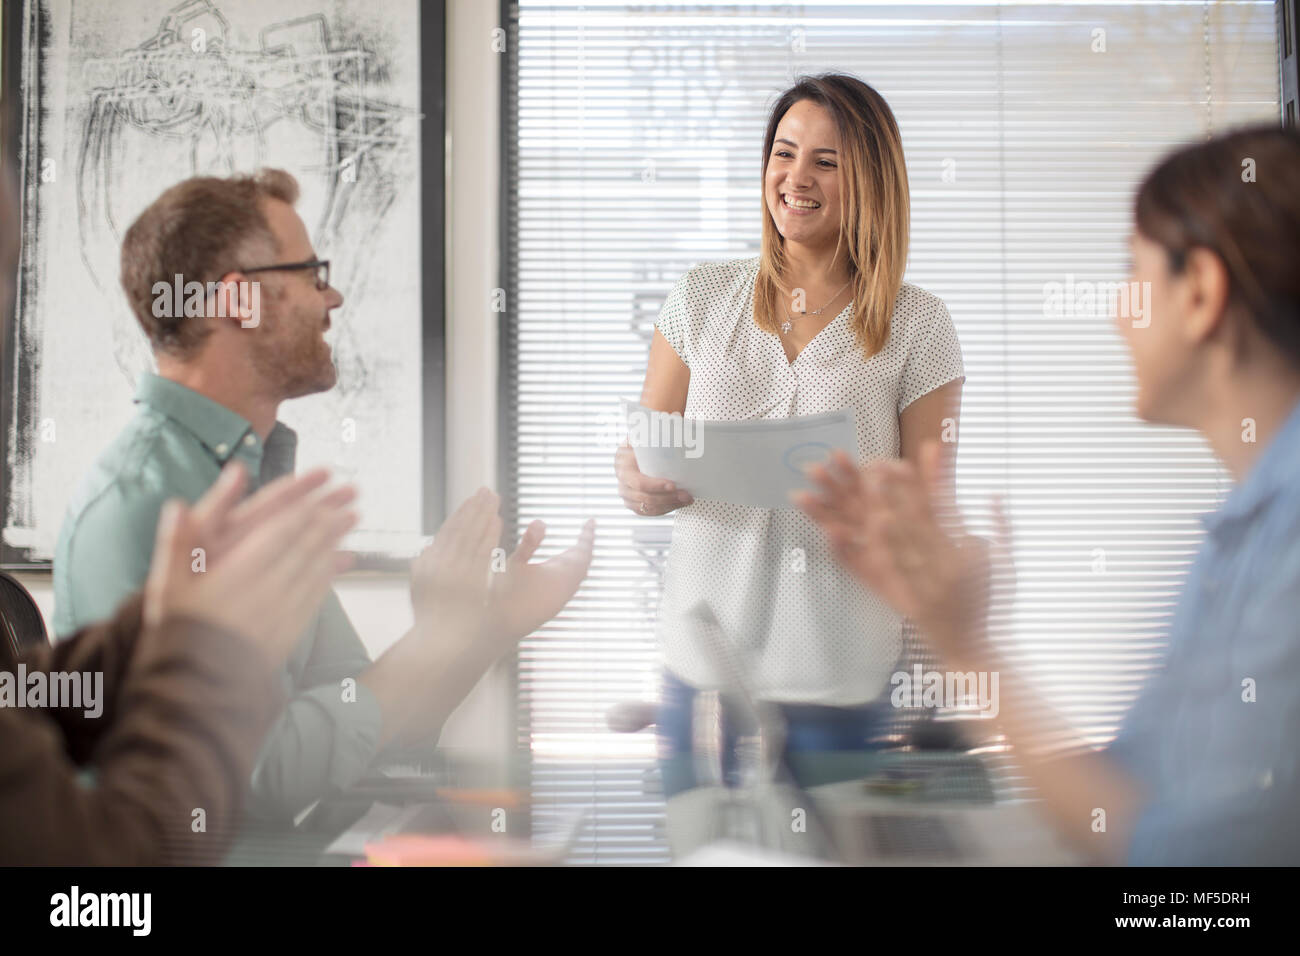 Colleagues applauding or businesswoman on a meeting in office boardroom Stock Photo